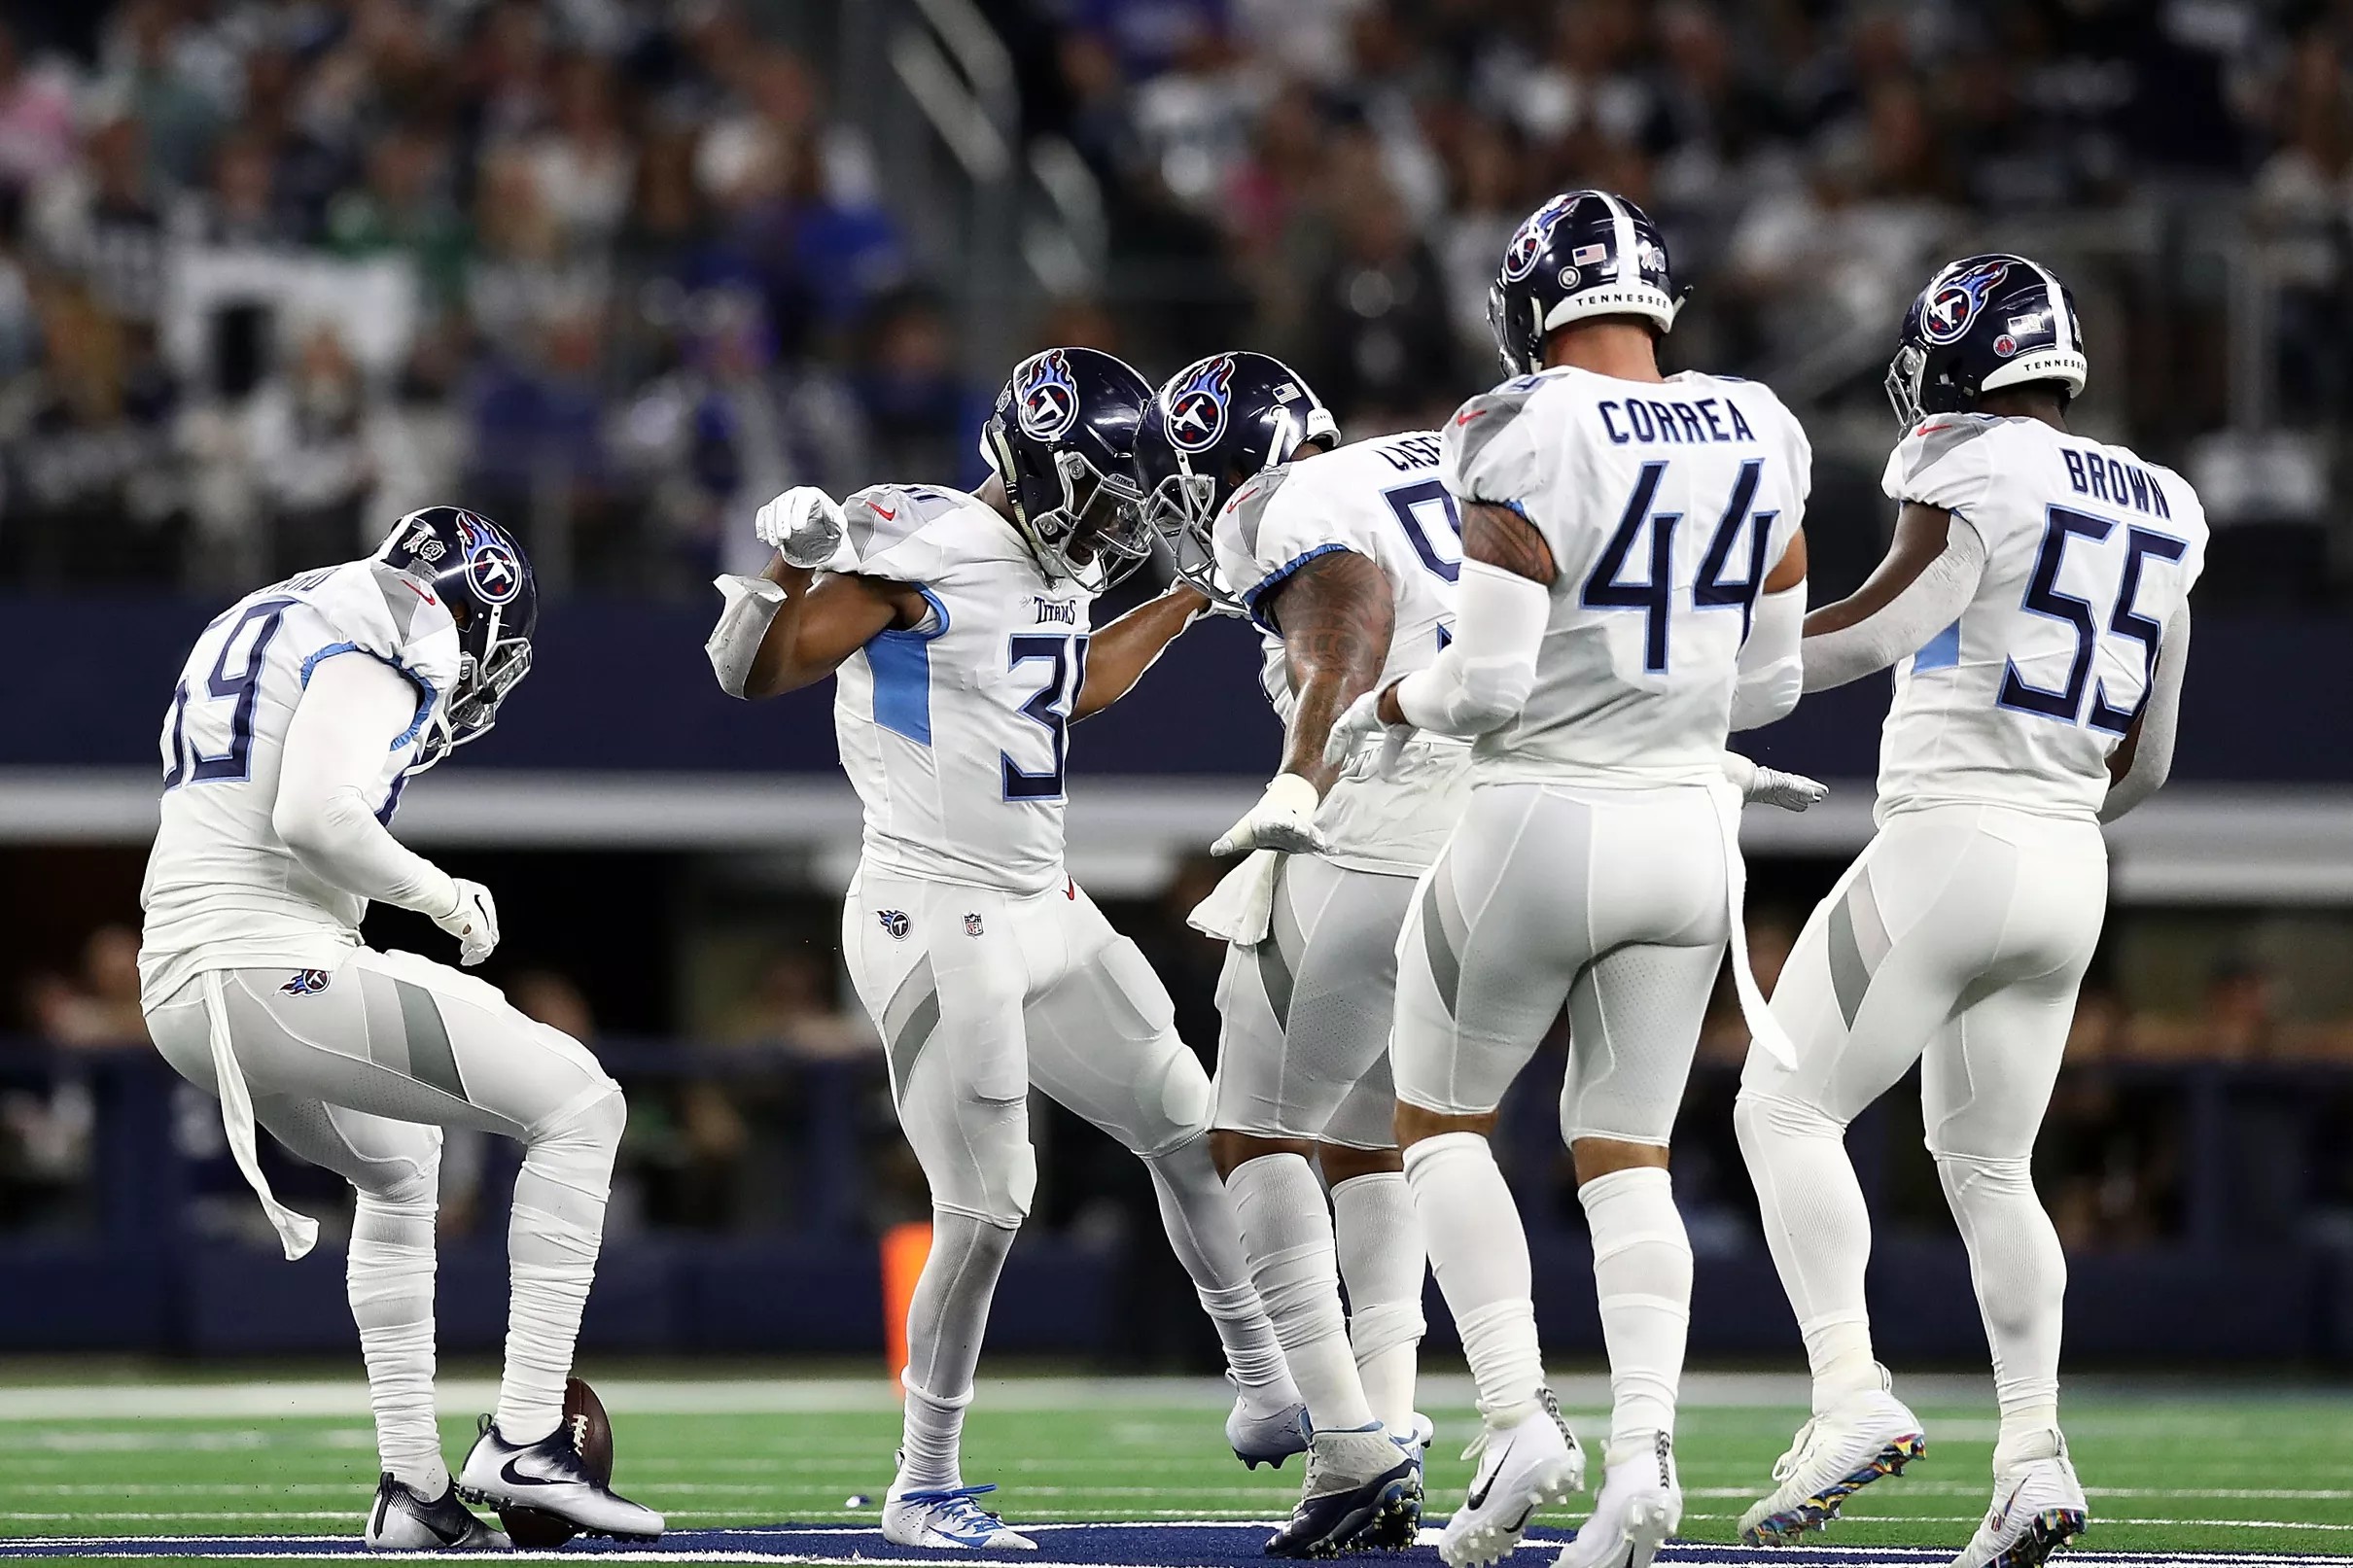 Kevin Byard fined 10,026 dollars for his celebration on the star